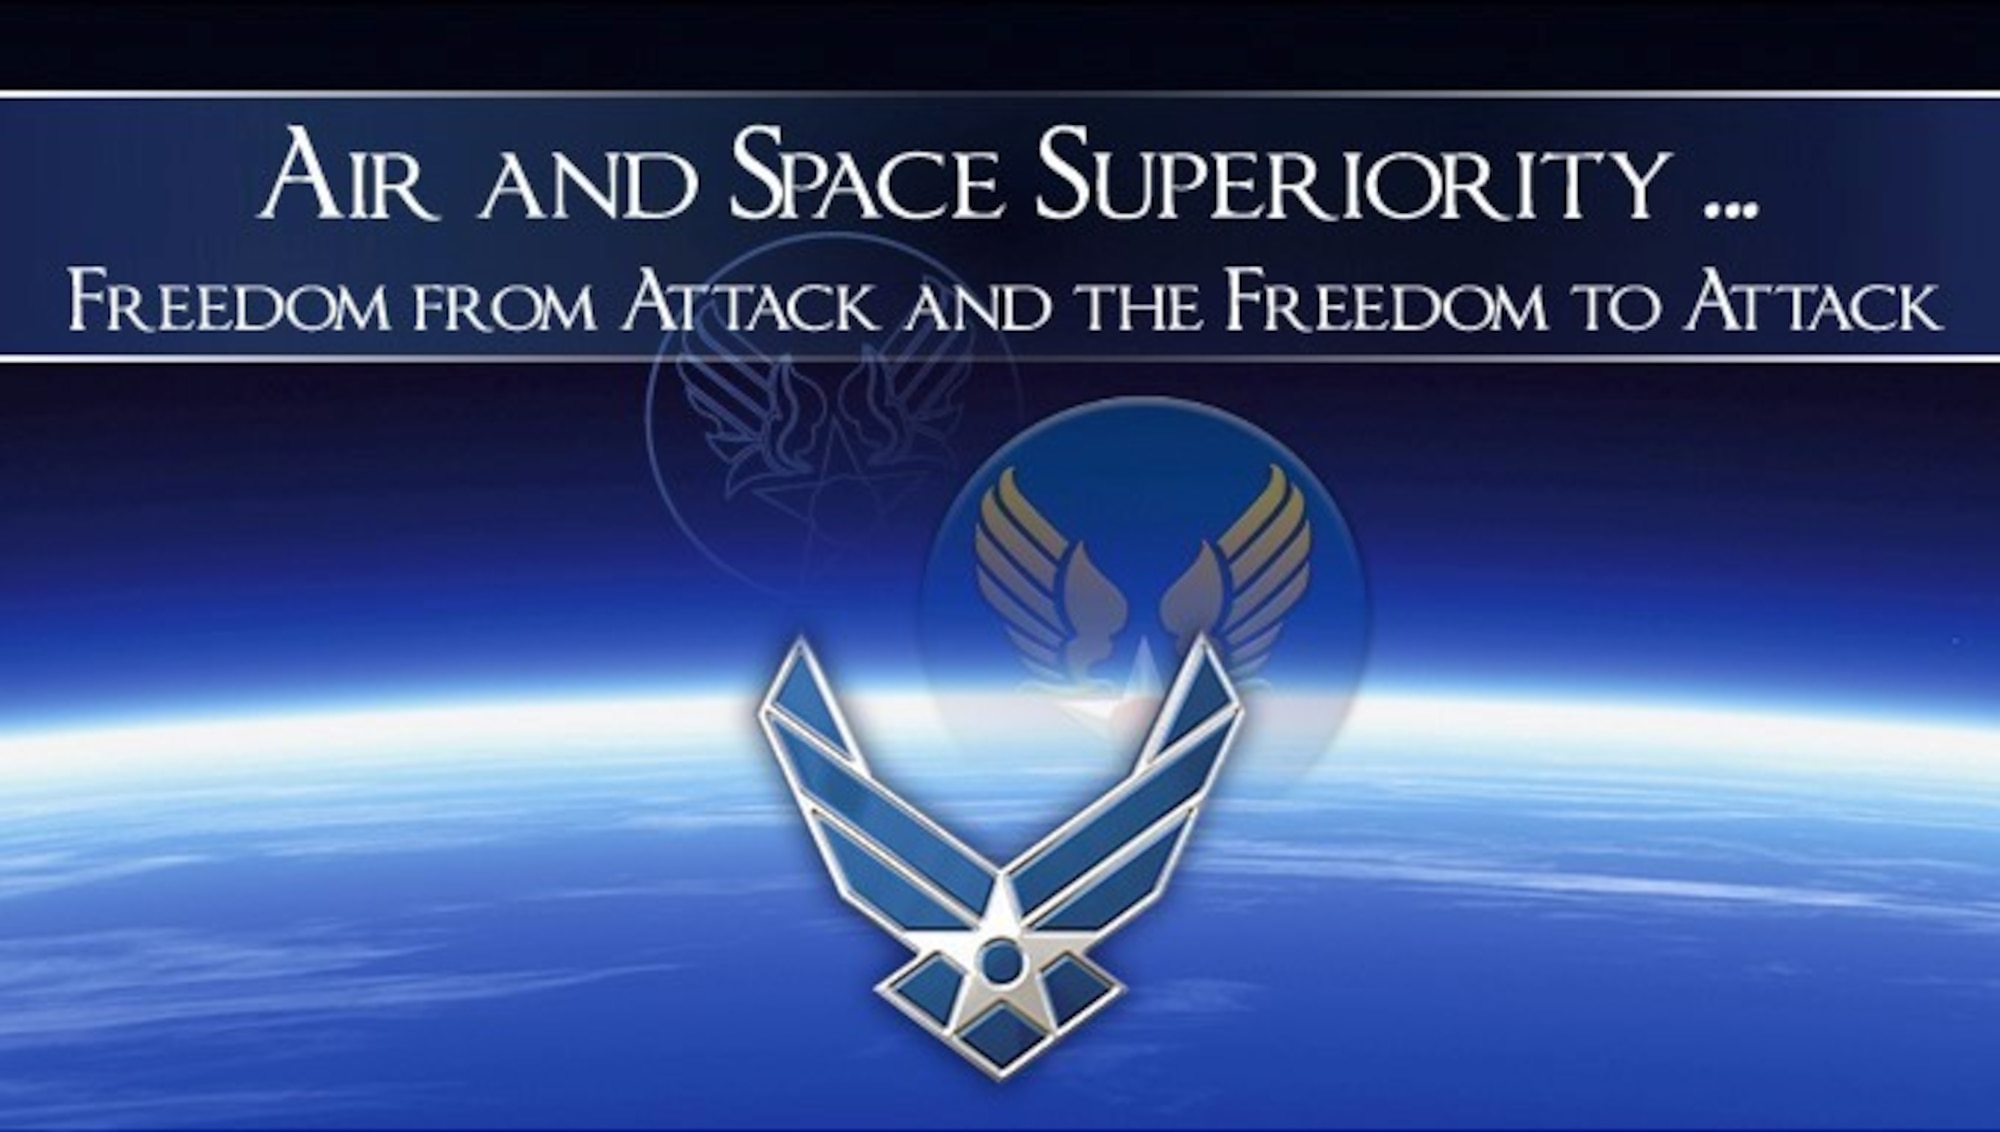 Air and Space Superiority